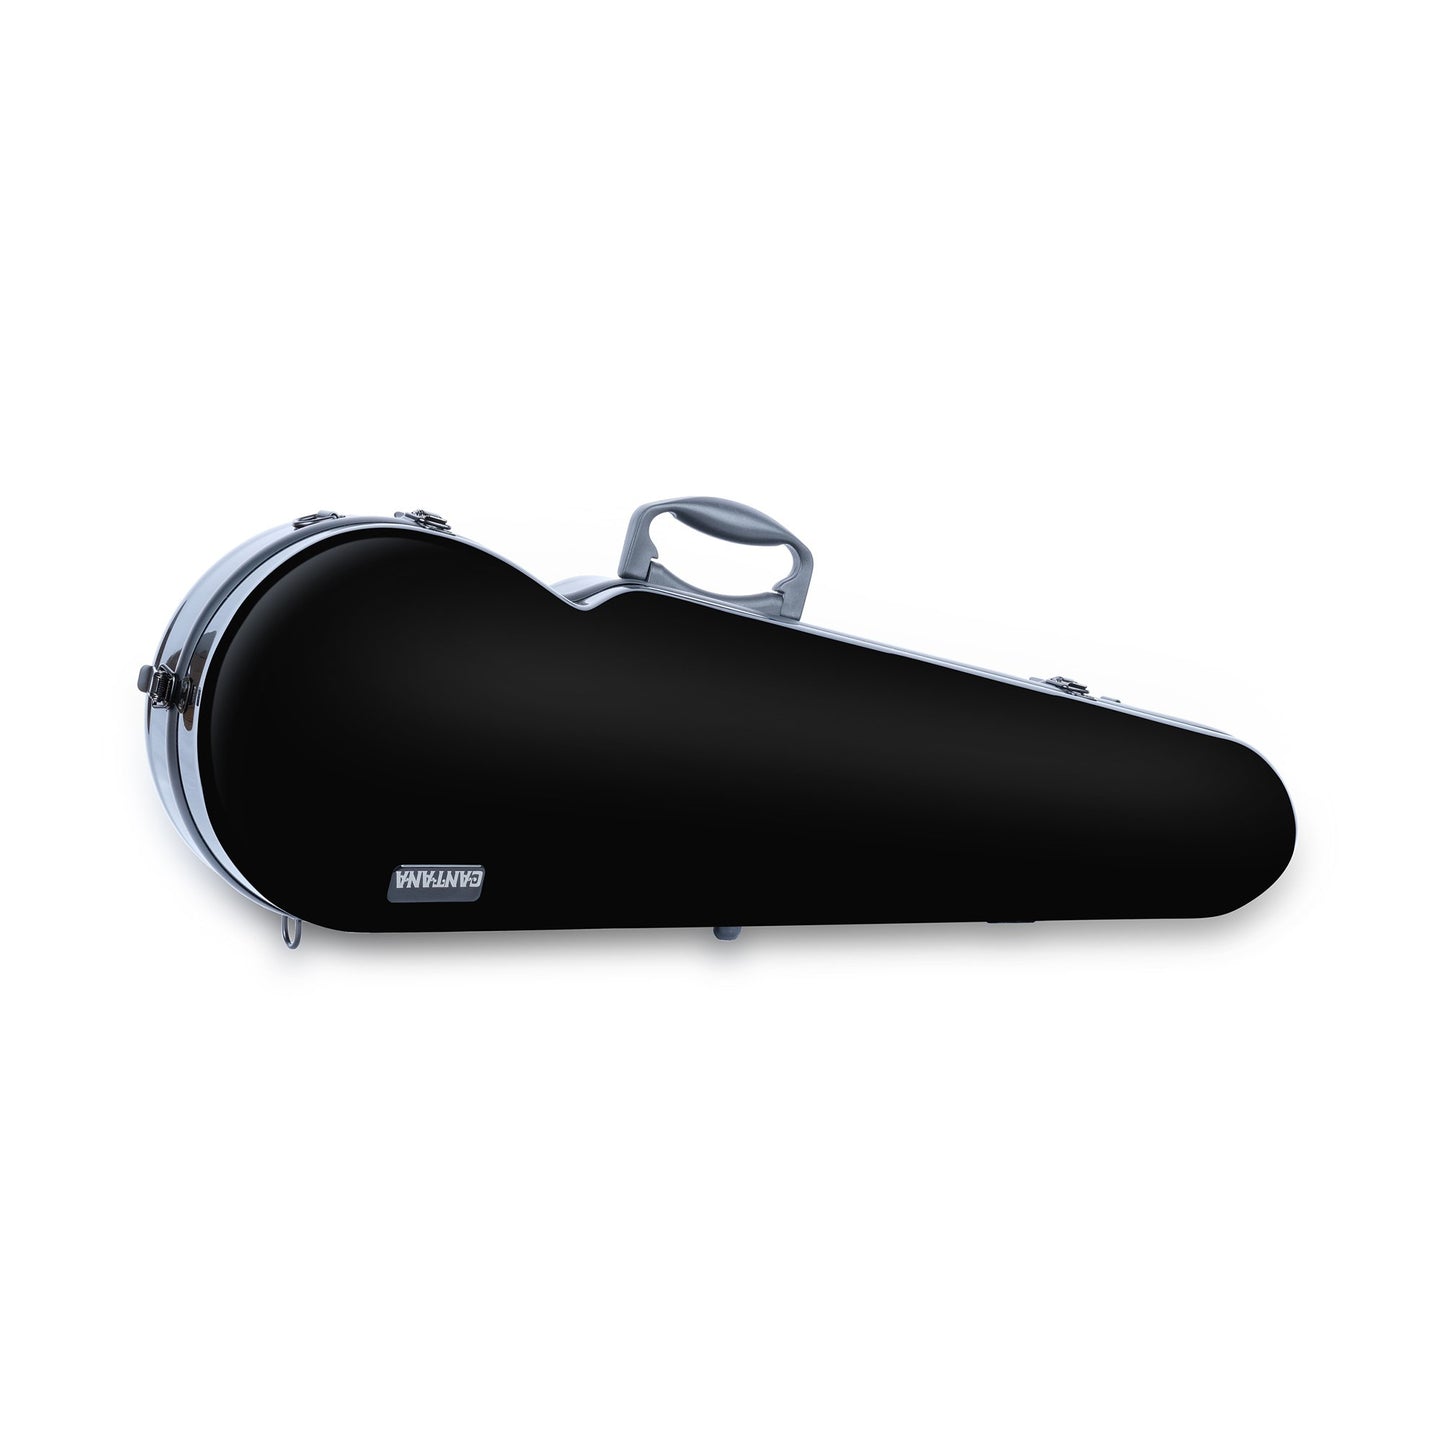 Cantana HiTech contour violin case rear side view high gloss black finish with a handle